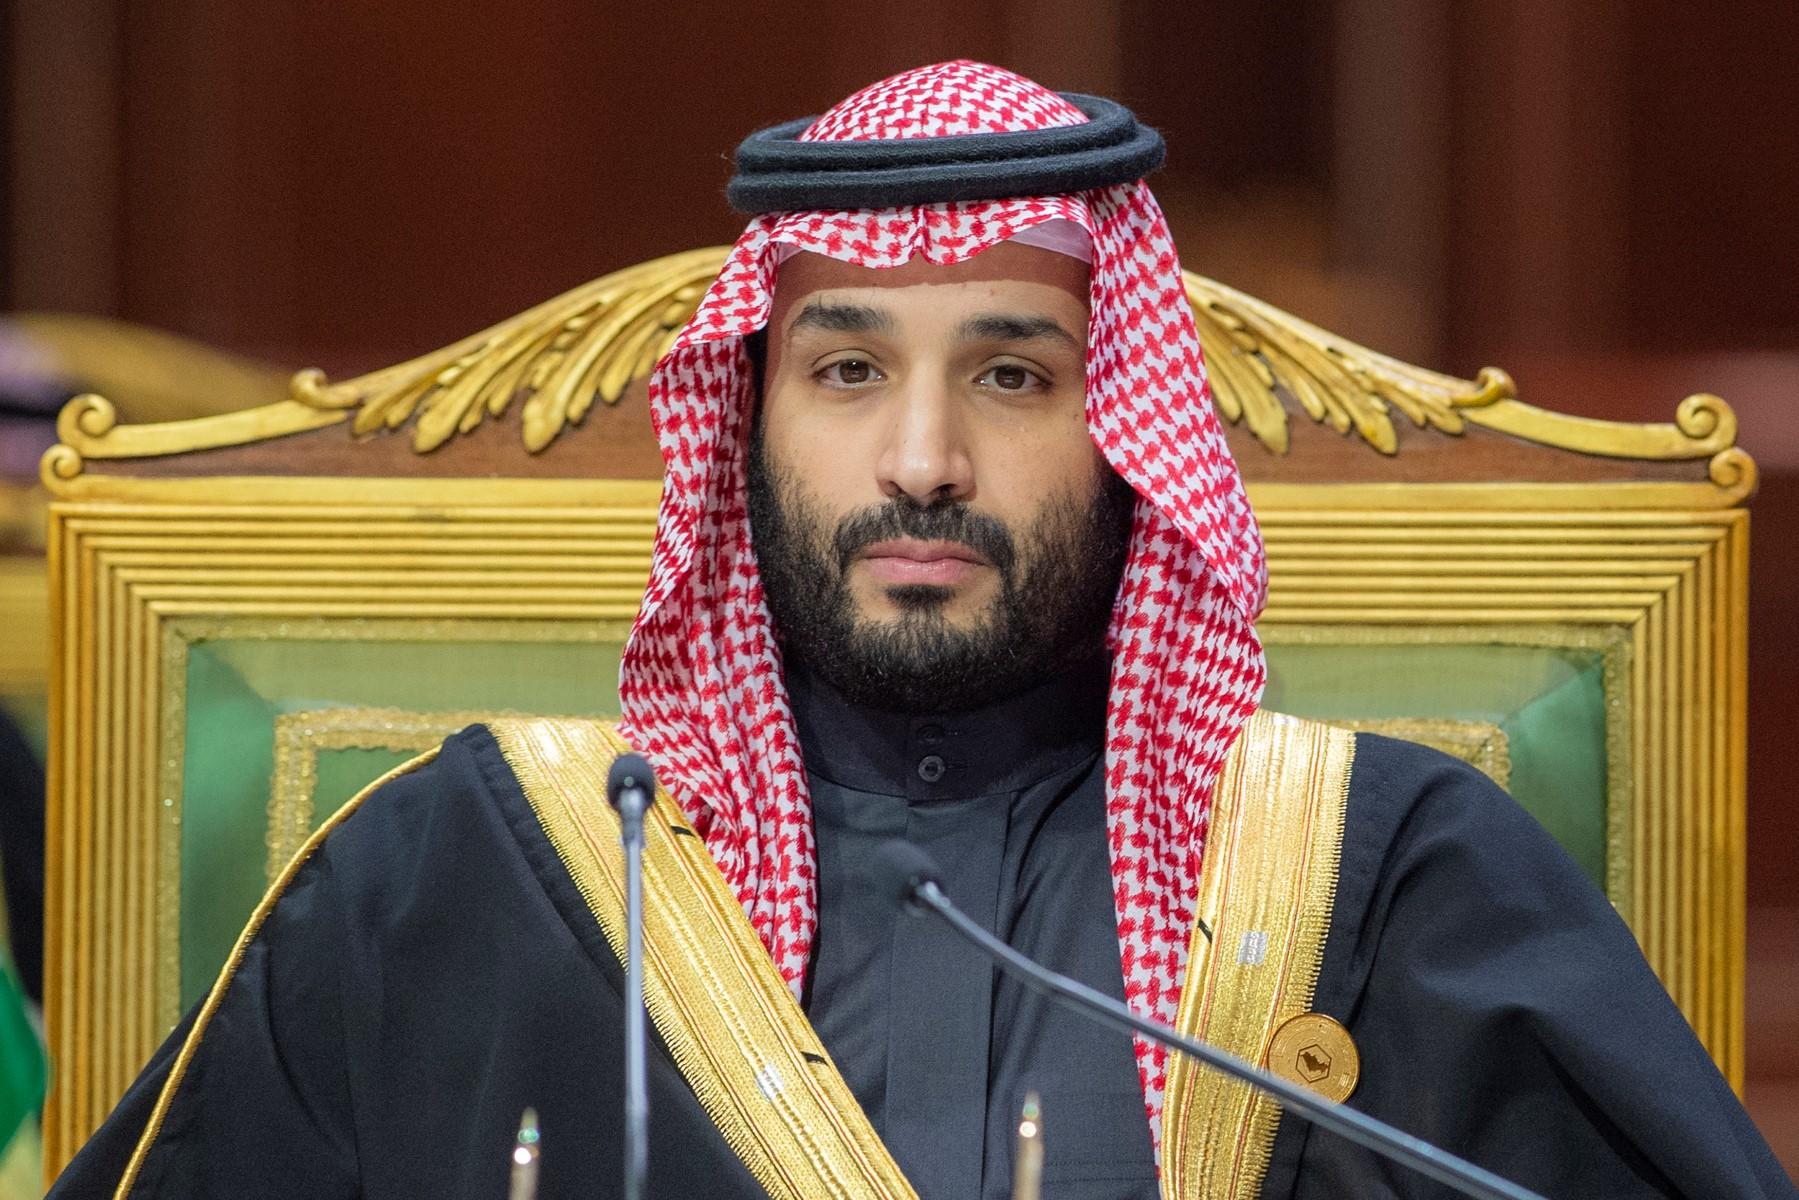 A handout picture provided by the Saudi Royal Palace shows Saudi Crown Prince Mohammed bin Salman chairing the Gulf Cooperation Council summit in Saudi Arabia's capital Riyadh on Dec 14, 2021. Photo: AFP